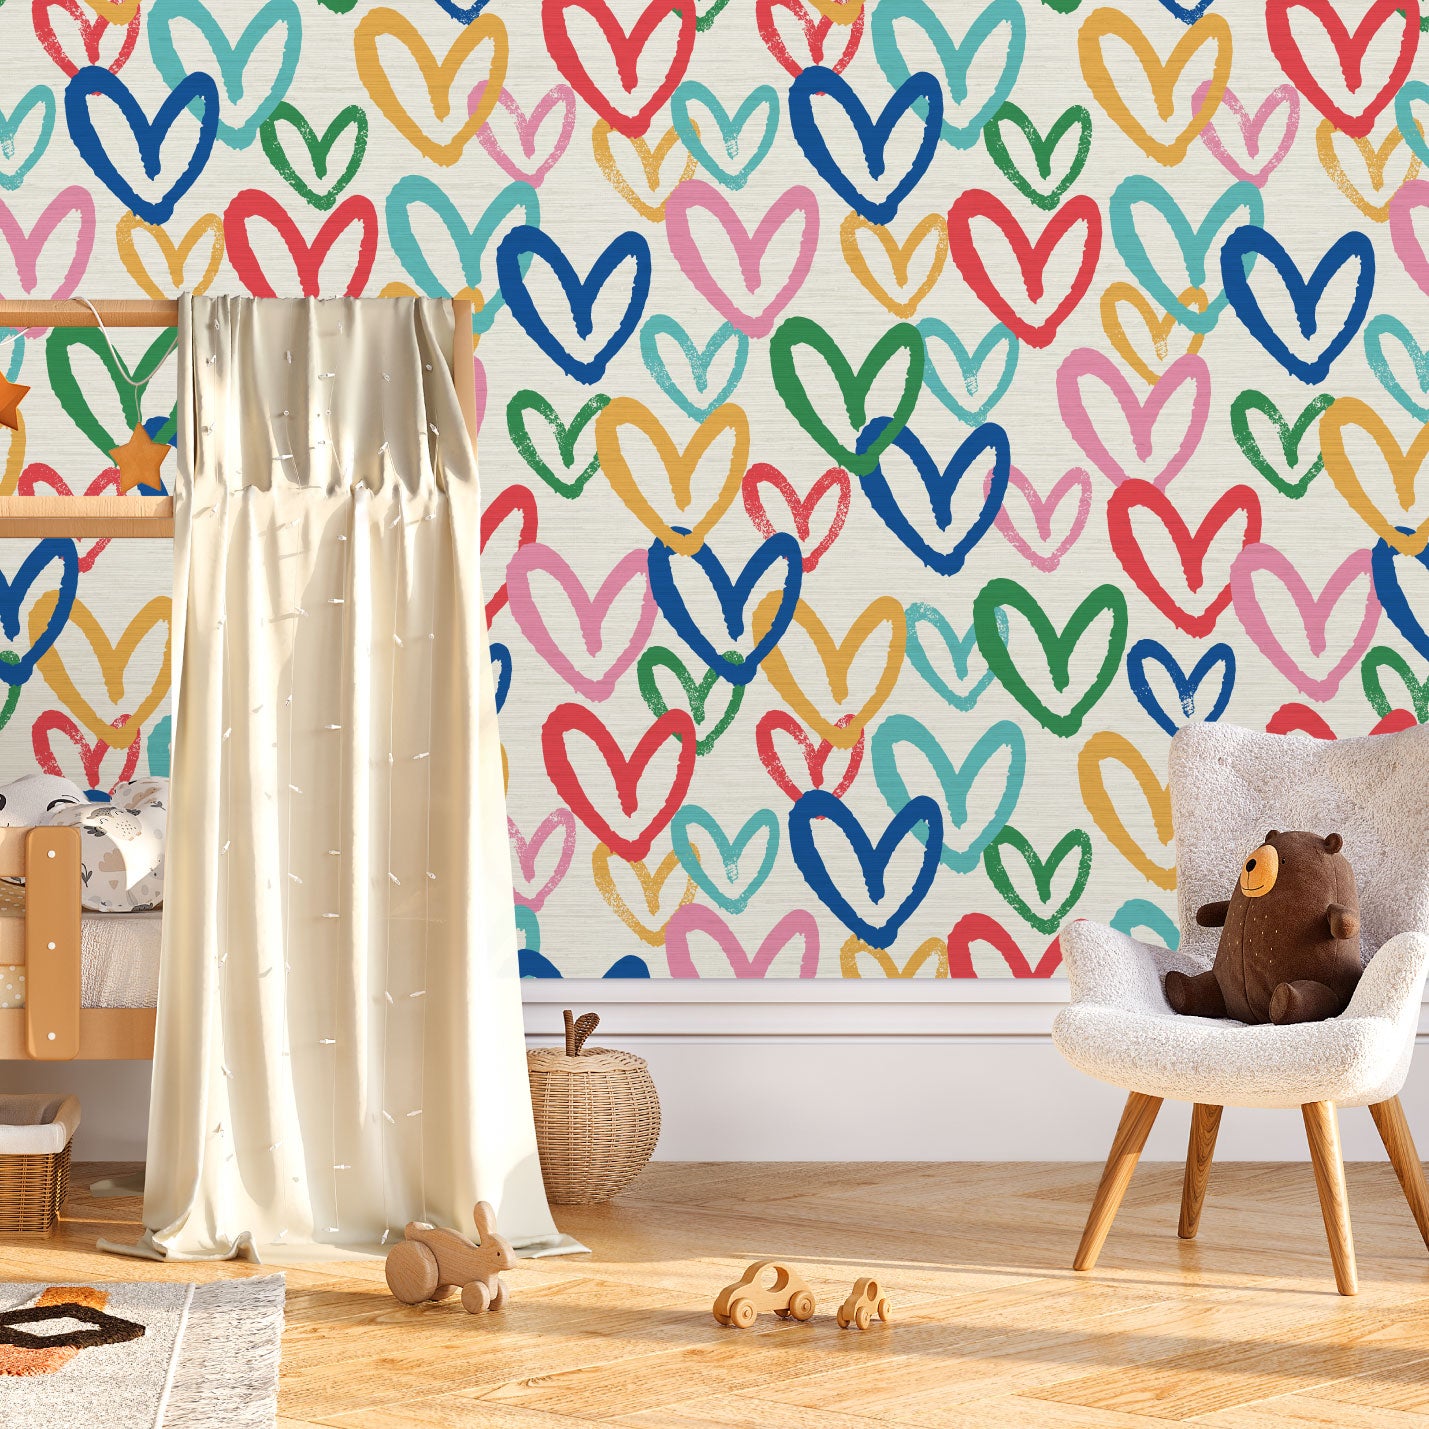 Printed grasscloth wallpaper in allover oversized layered heart print great for kids bedrooms and playroom for a fun and happy wallpaper print design and decor Natural Textured Eco-Friendly Non-toxic High-quality Sustainable Interior Design Bold Custom Tailor-made Retro chic House of Shan Imperfect heart white rainbow